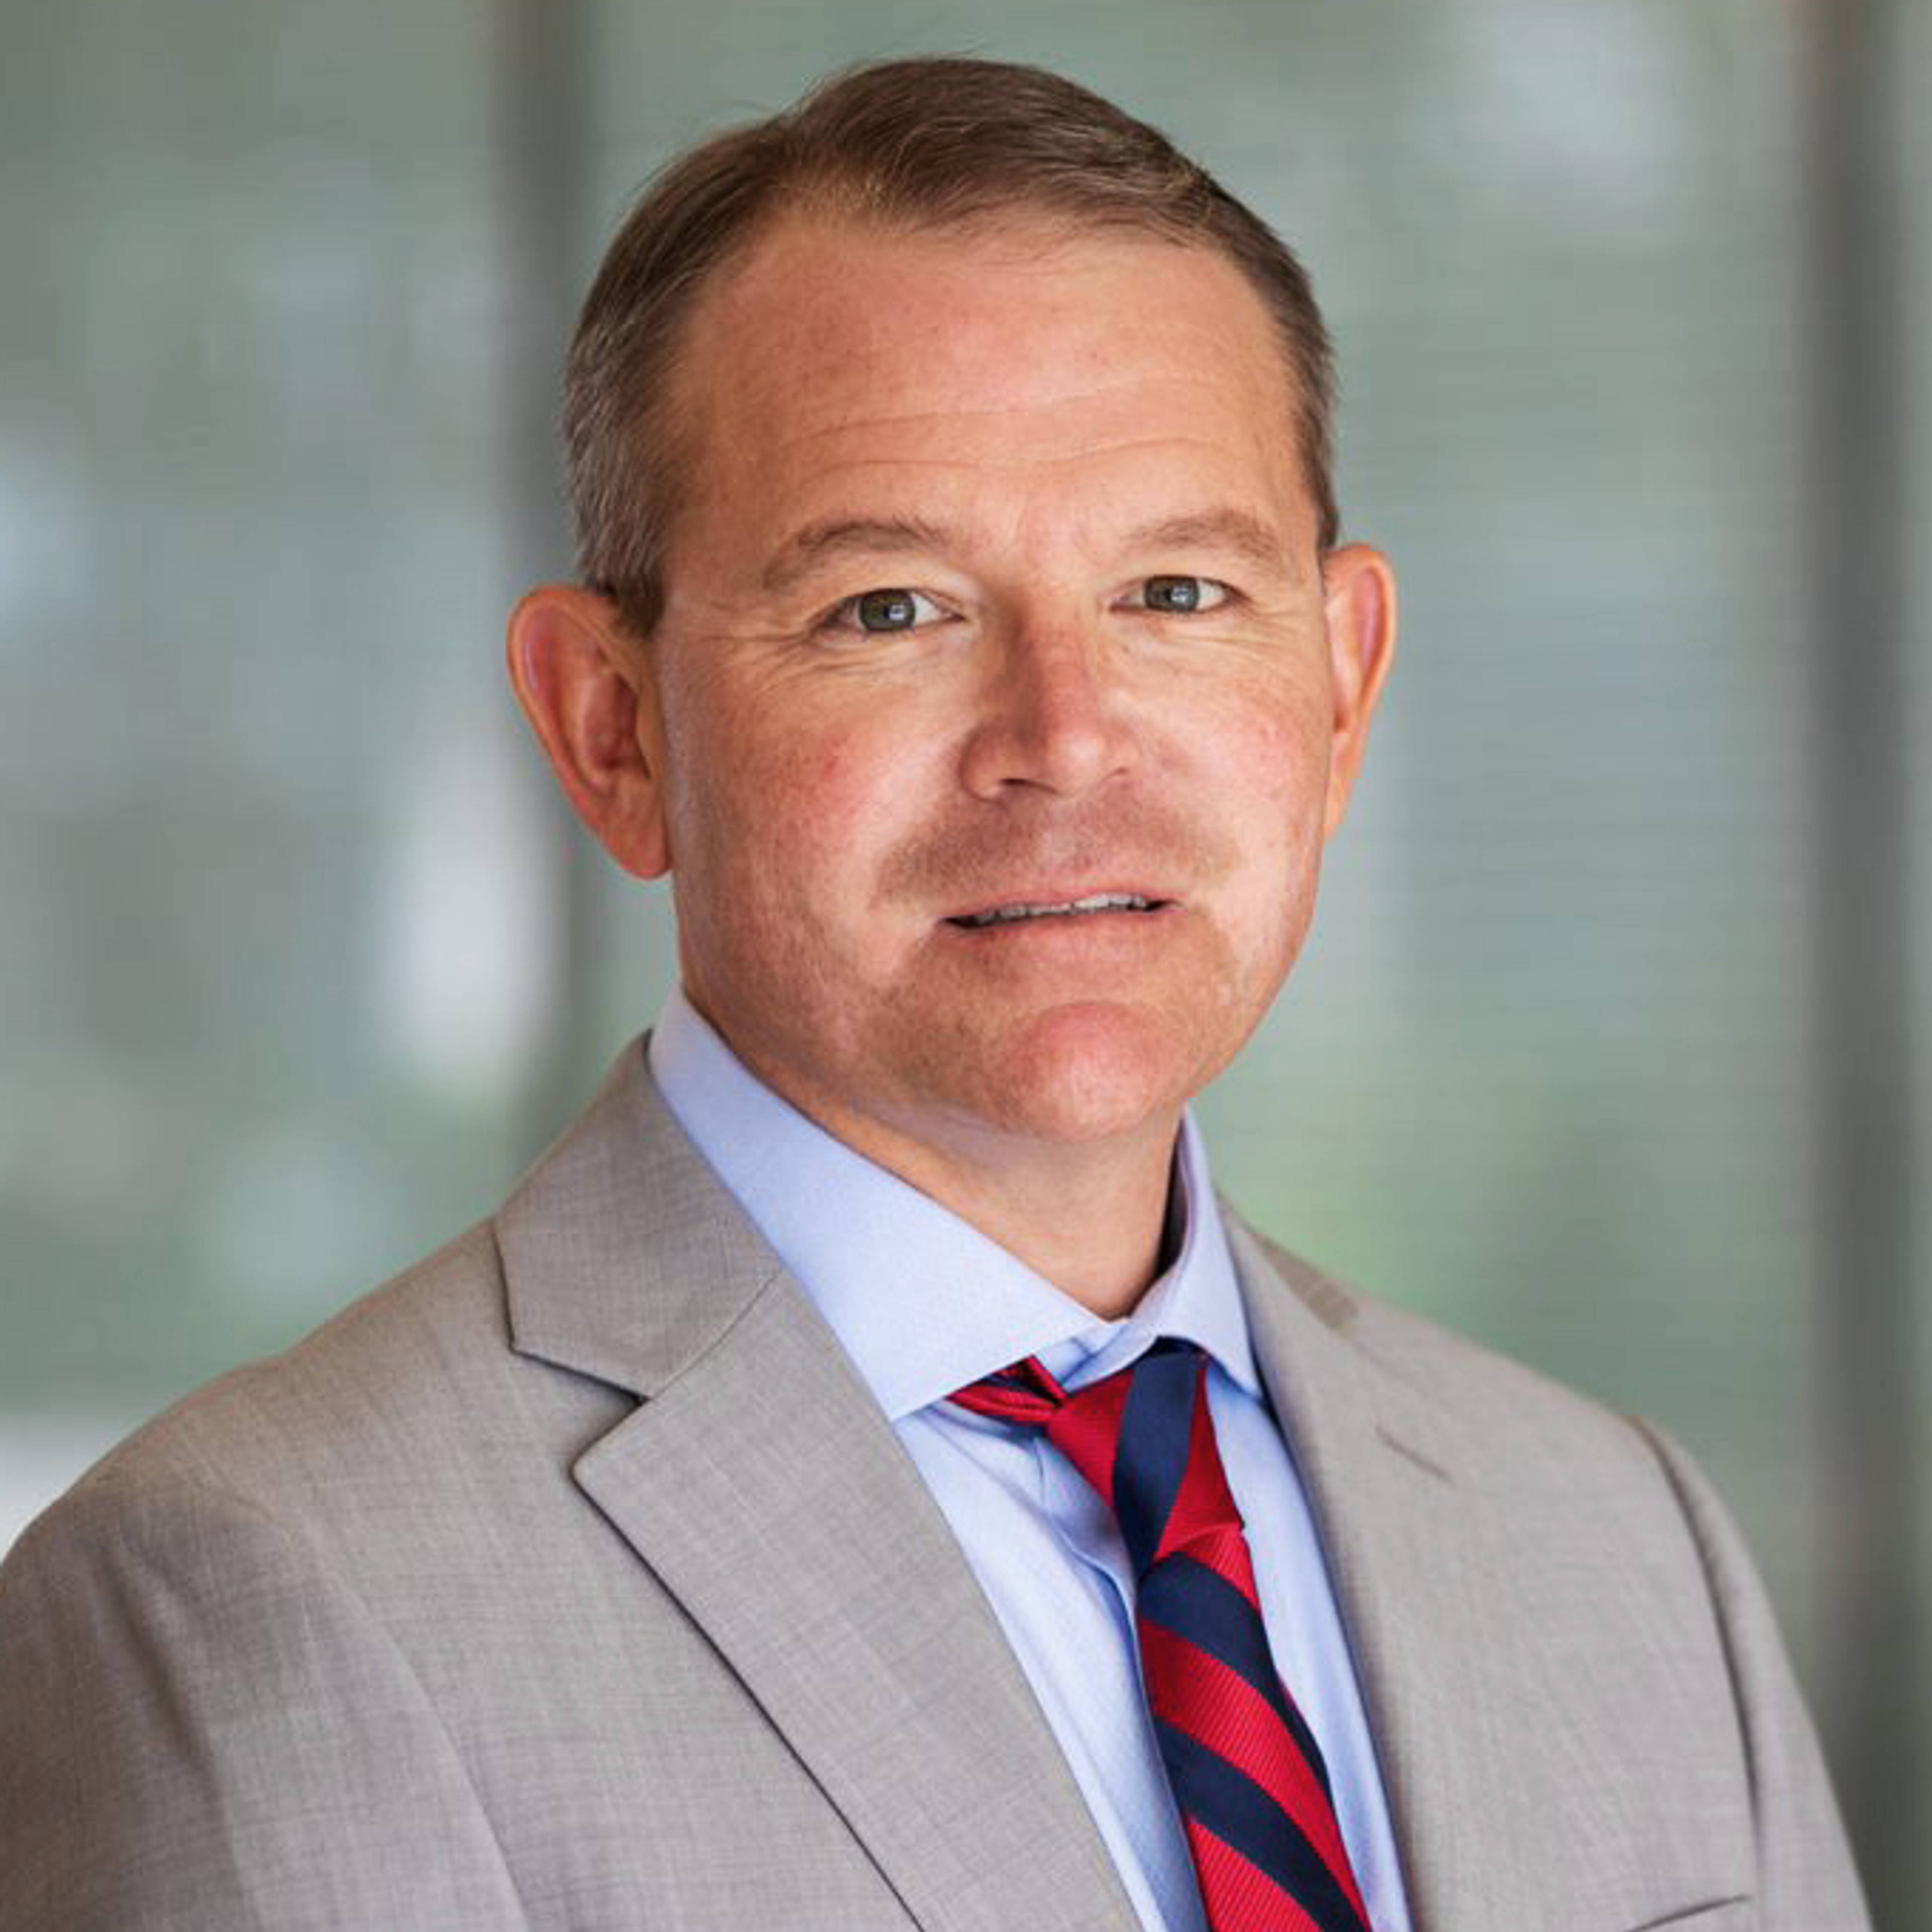 Chris Golden, Equinor U.S. country manager